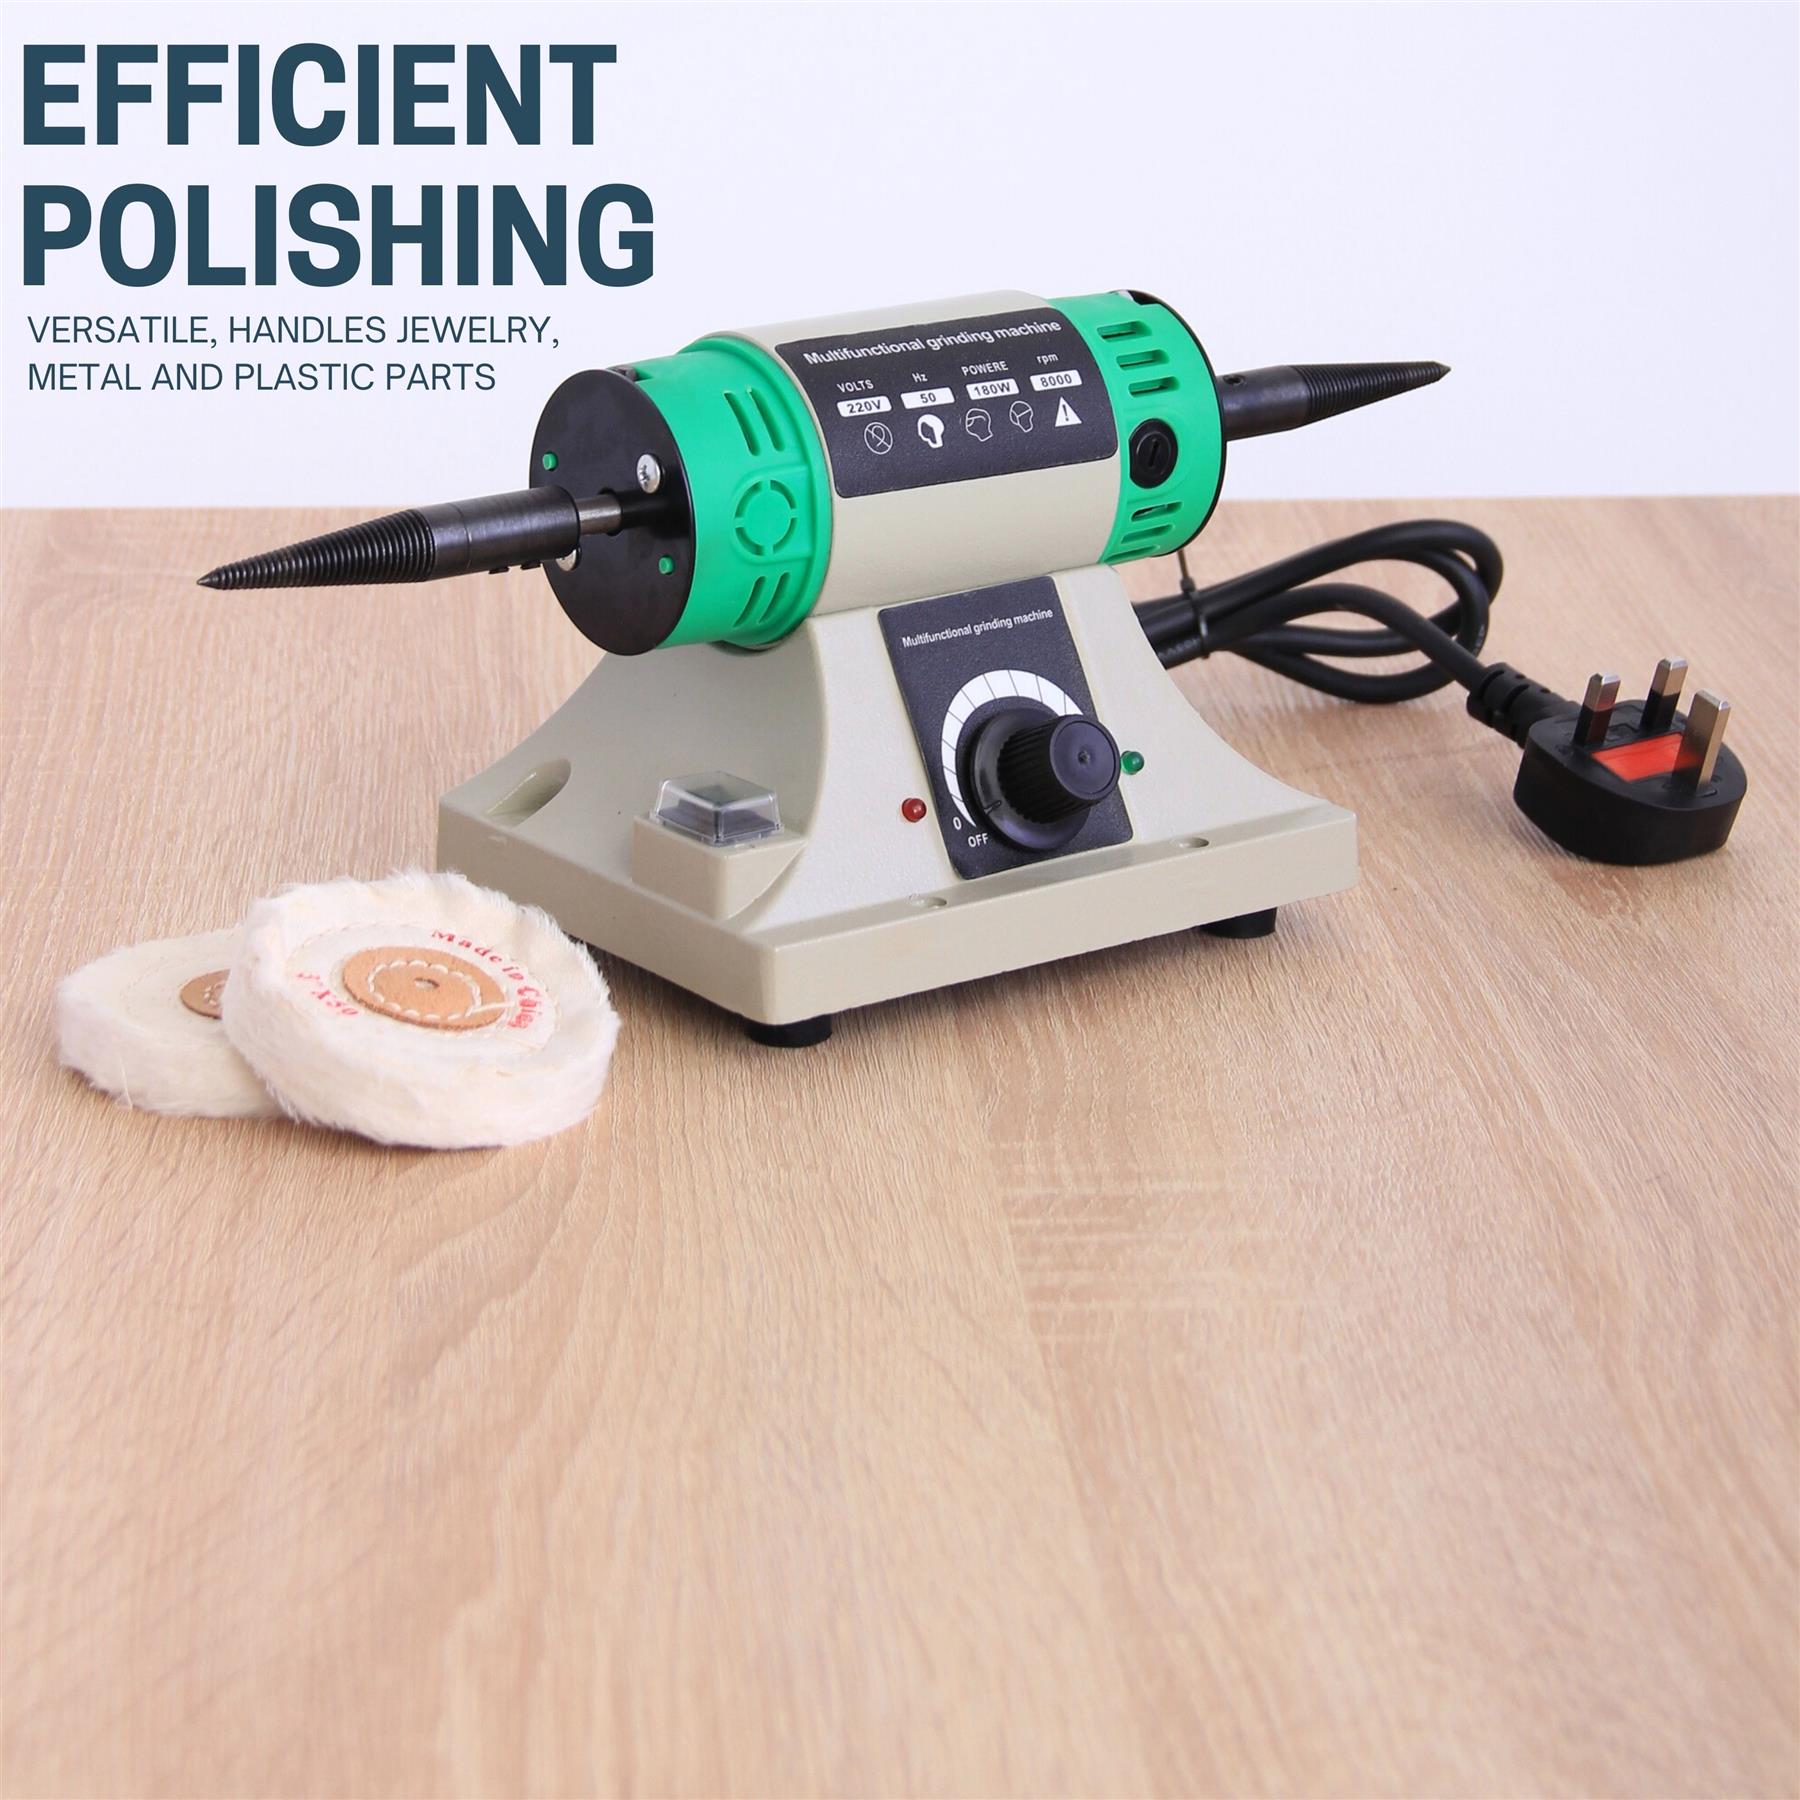 Mini Dual Bench Polisher Machine for Polishing Various Metals and Materials